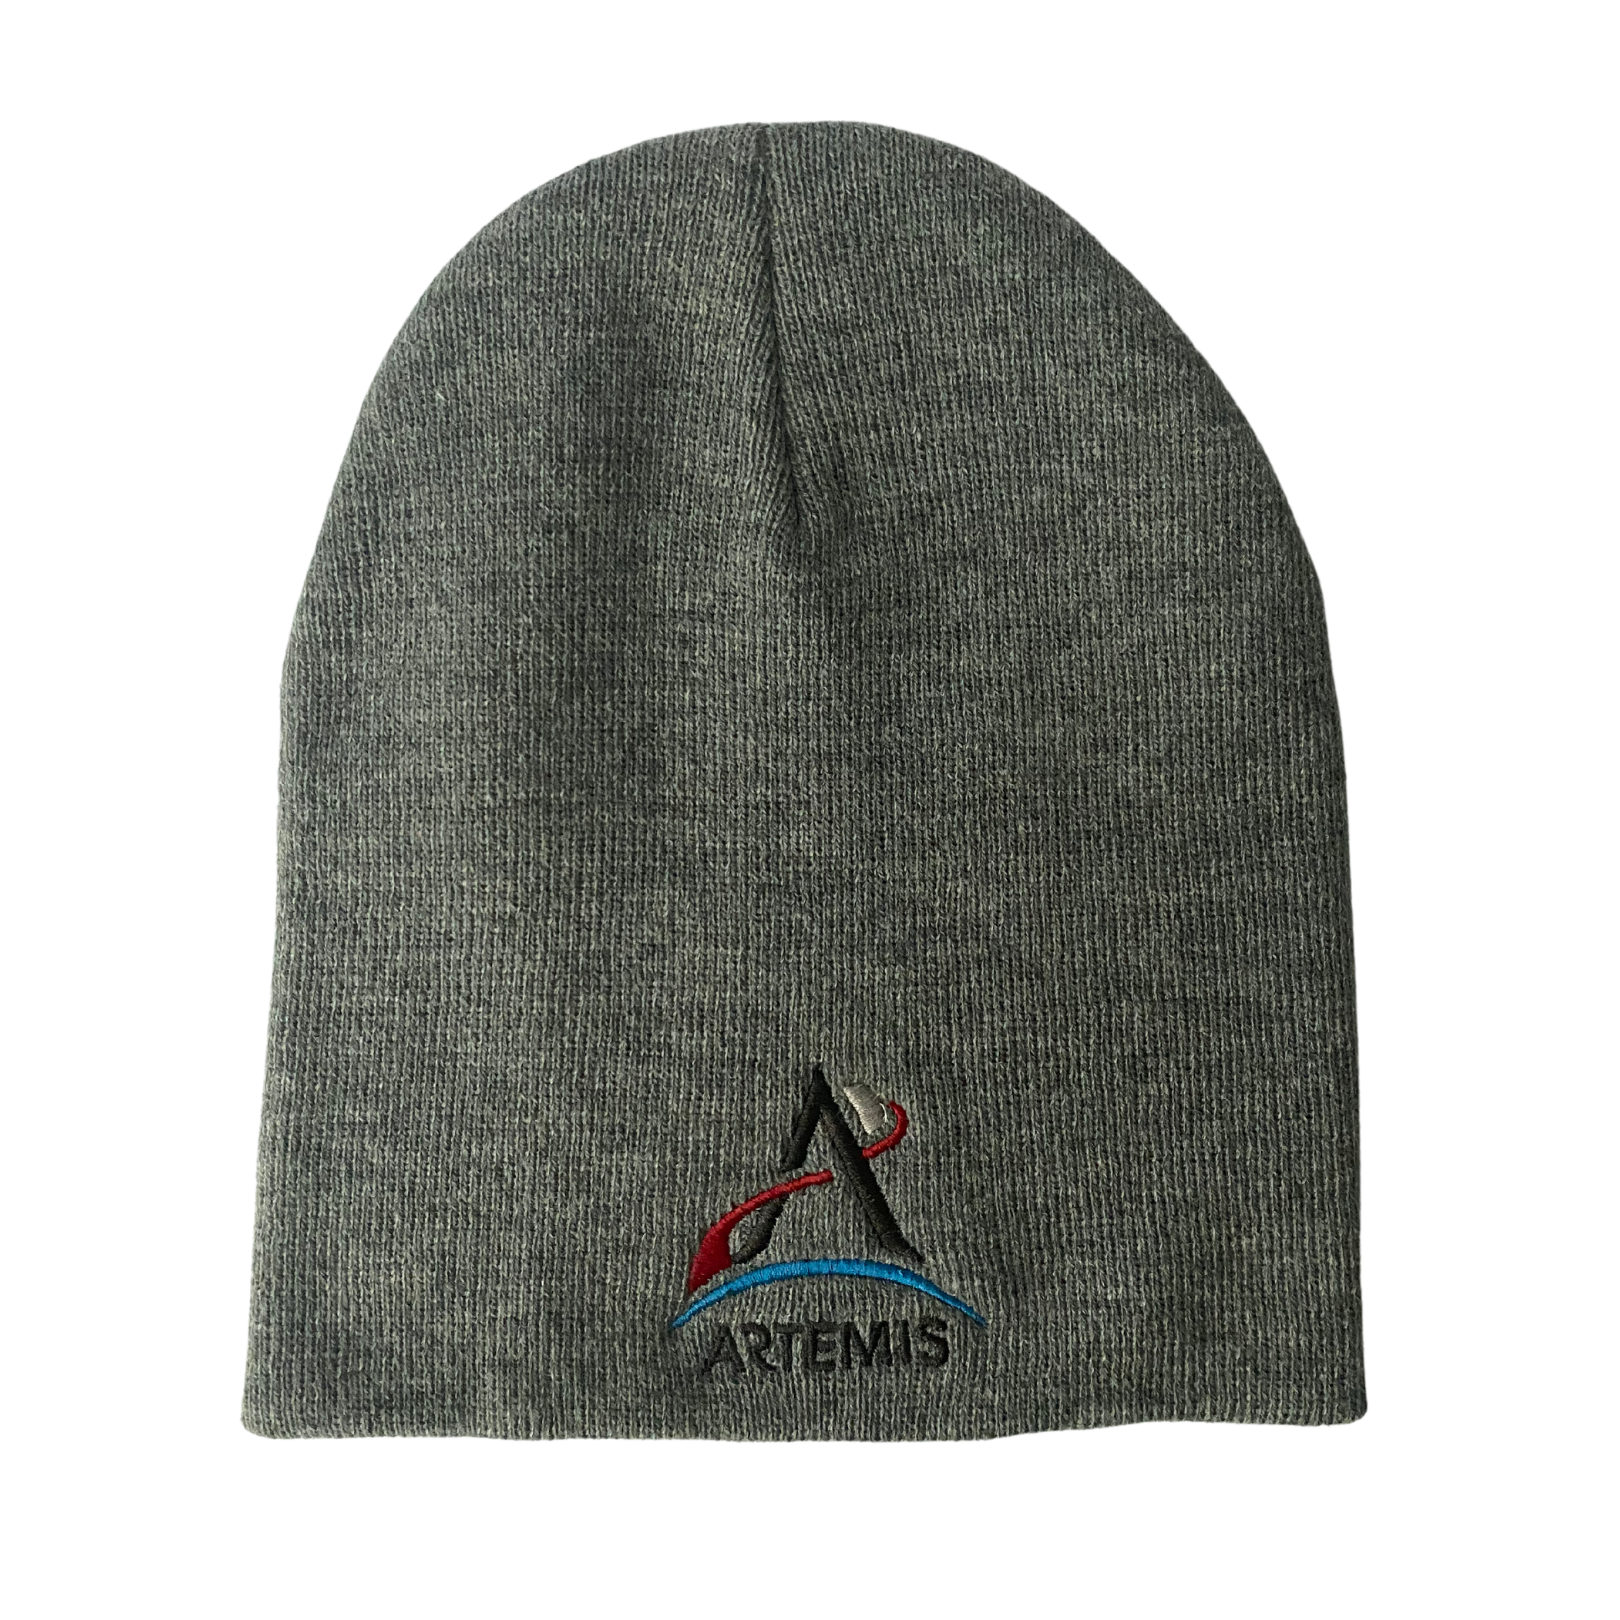 Artemis Program Logo Embroidered Beanie - Assorted Colors